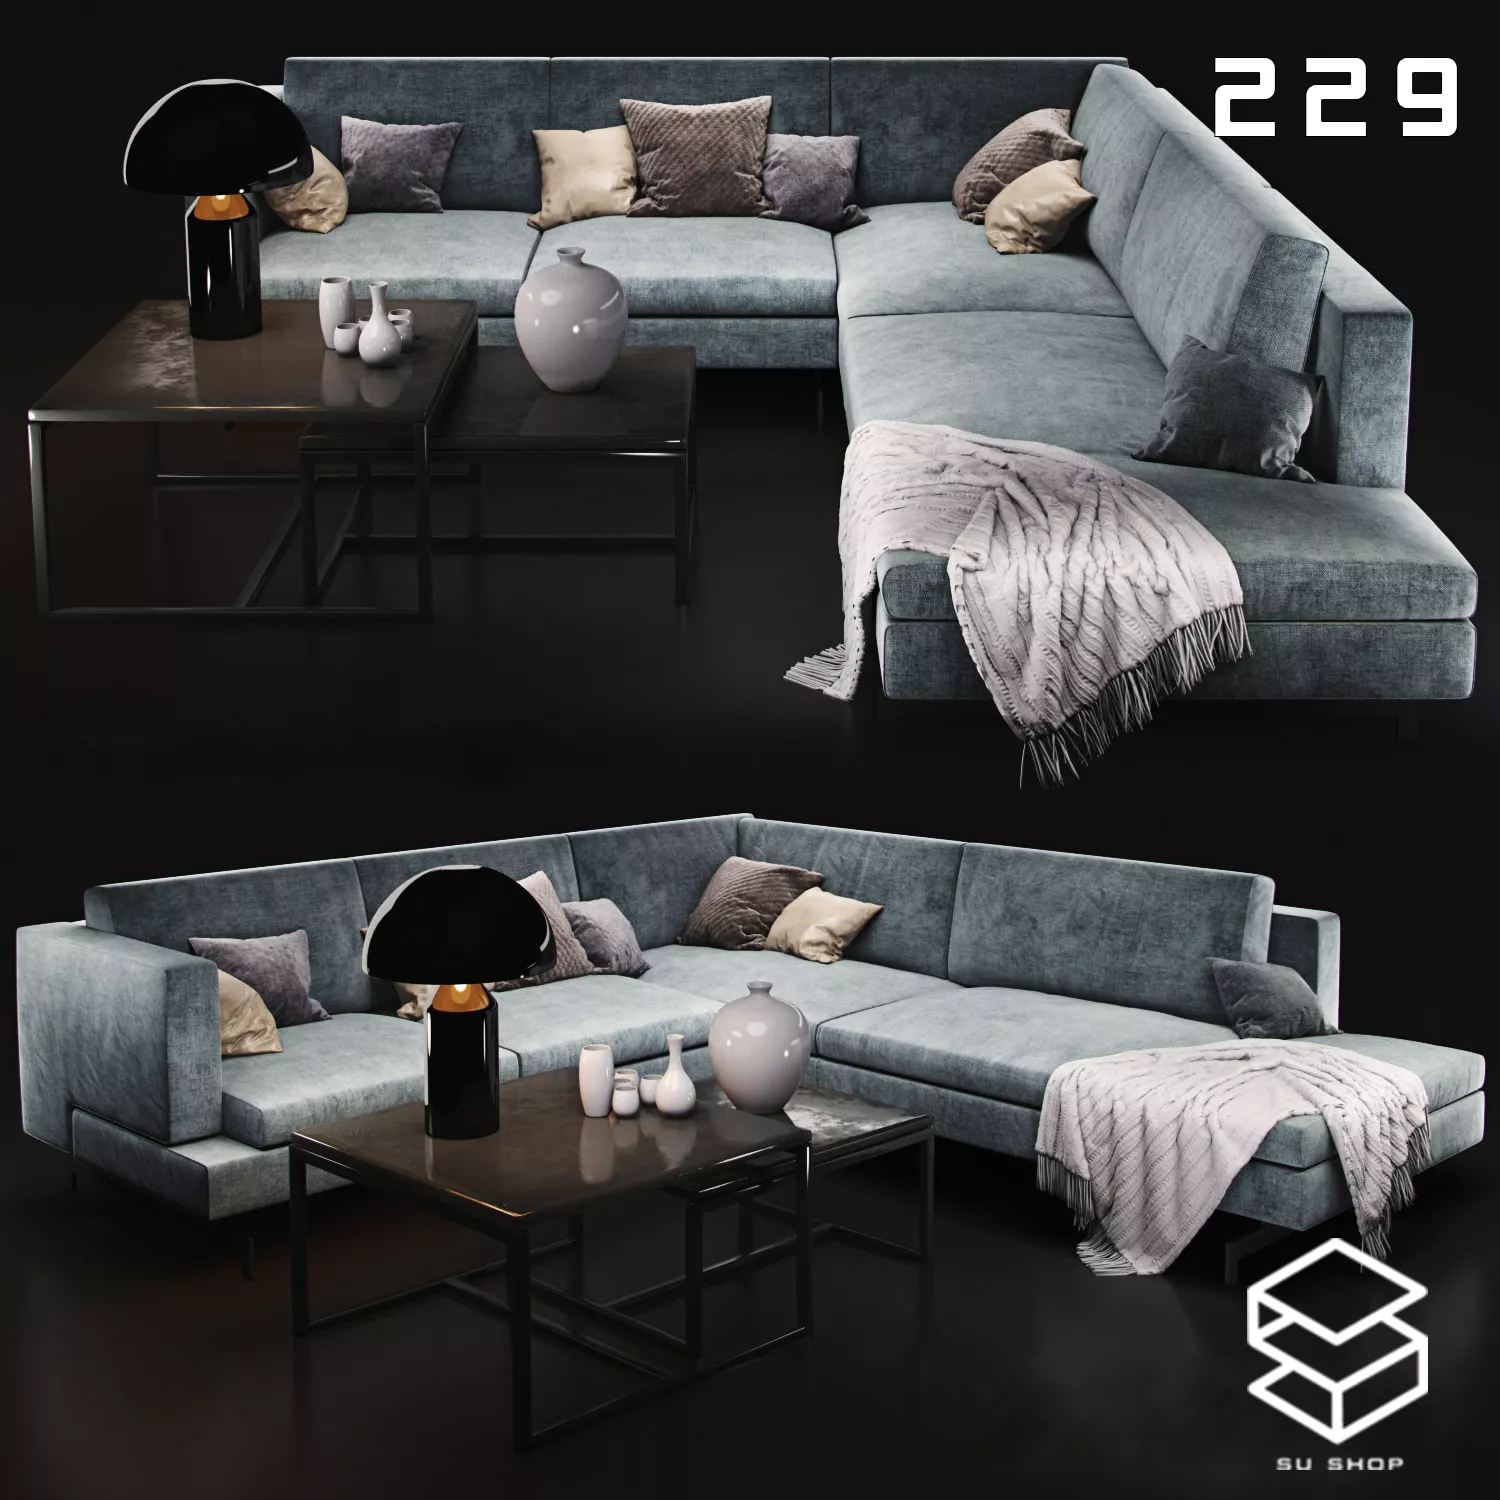 MODERN SOFA - SKETCHUP 3D MODEL - VRAY OR ENSCAPE - ID13529